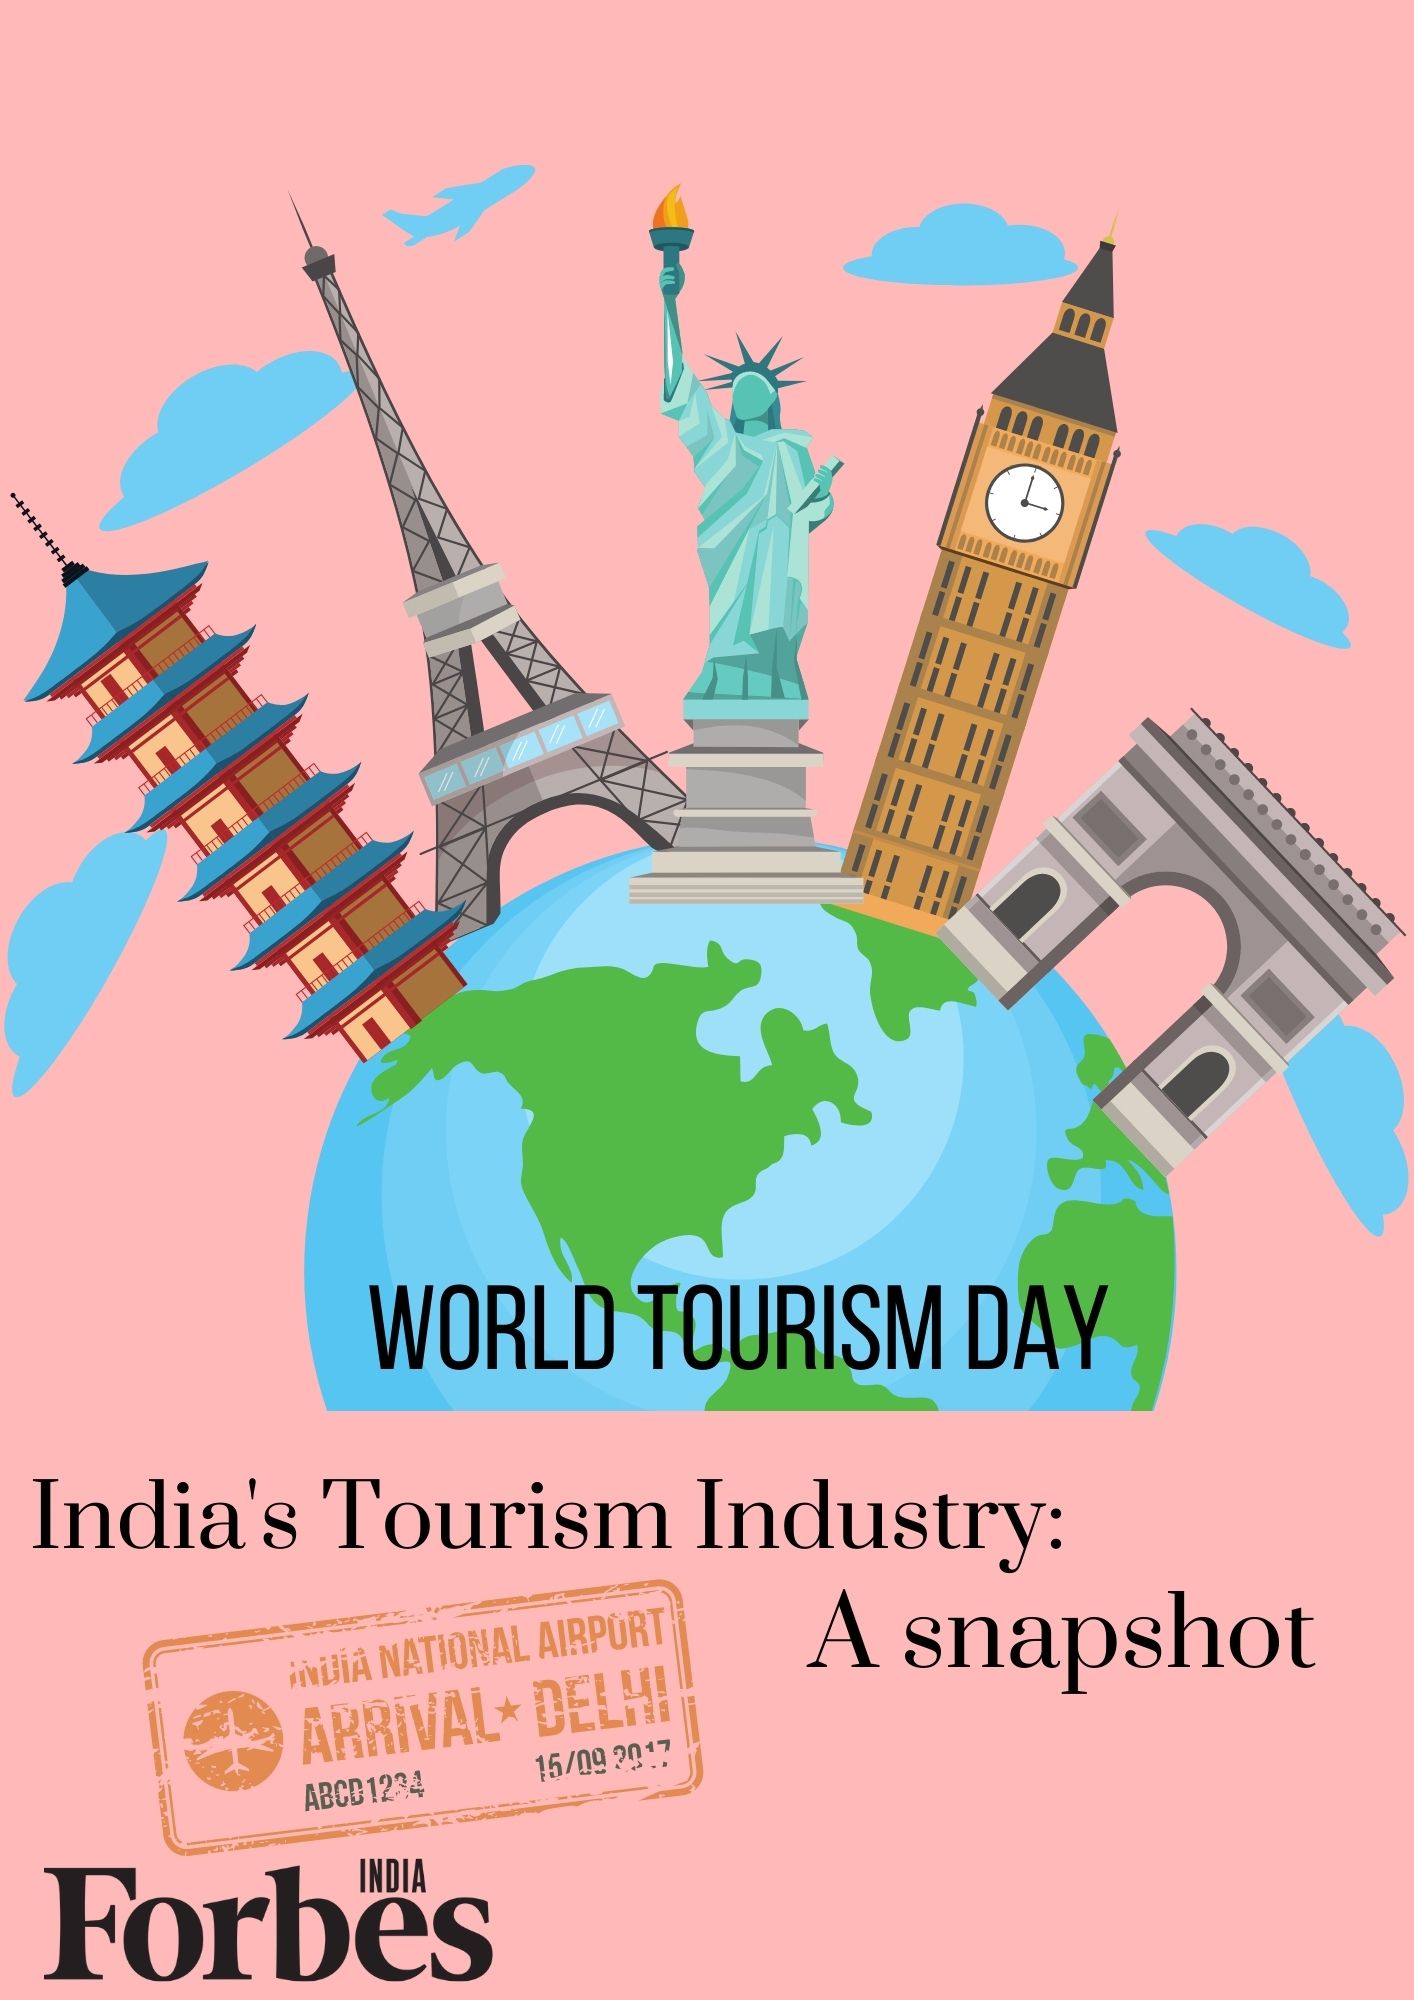 Tourism's contribution to India's GDP and employment falls 36.3% and 20.8%, respectively